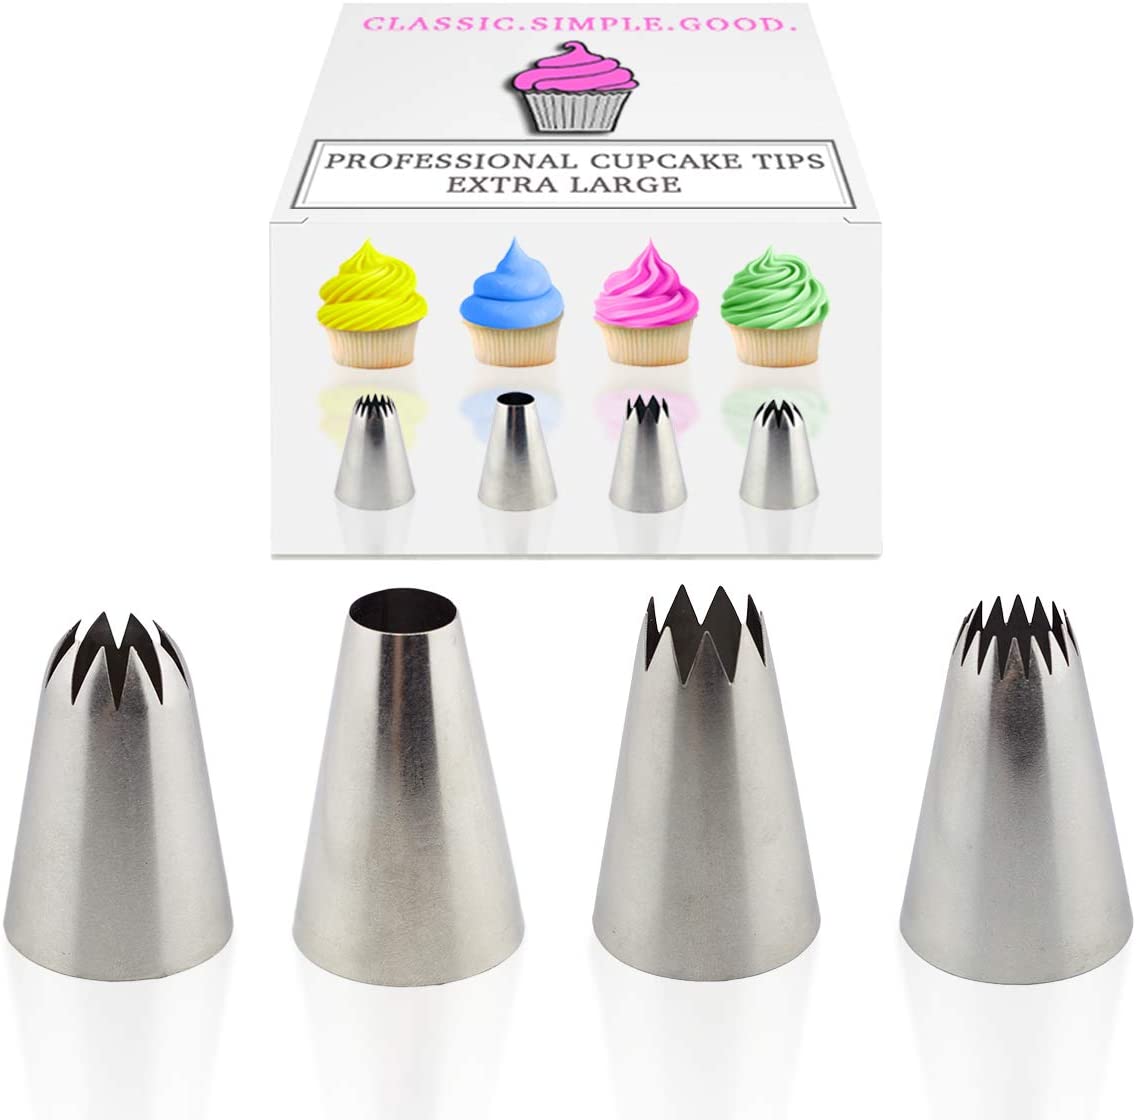 Extra Large Piping Tips